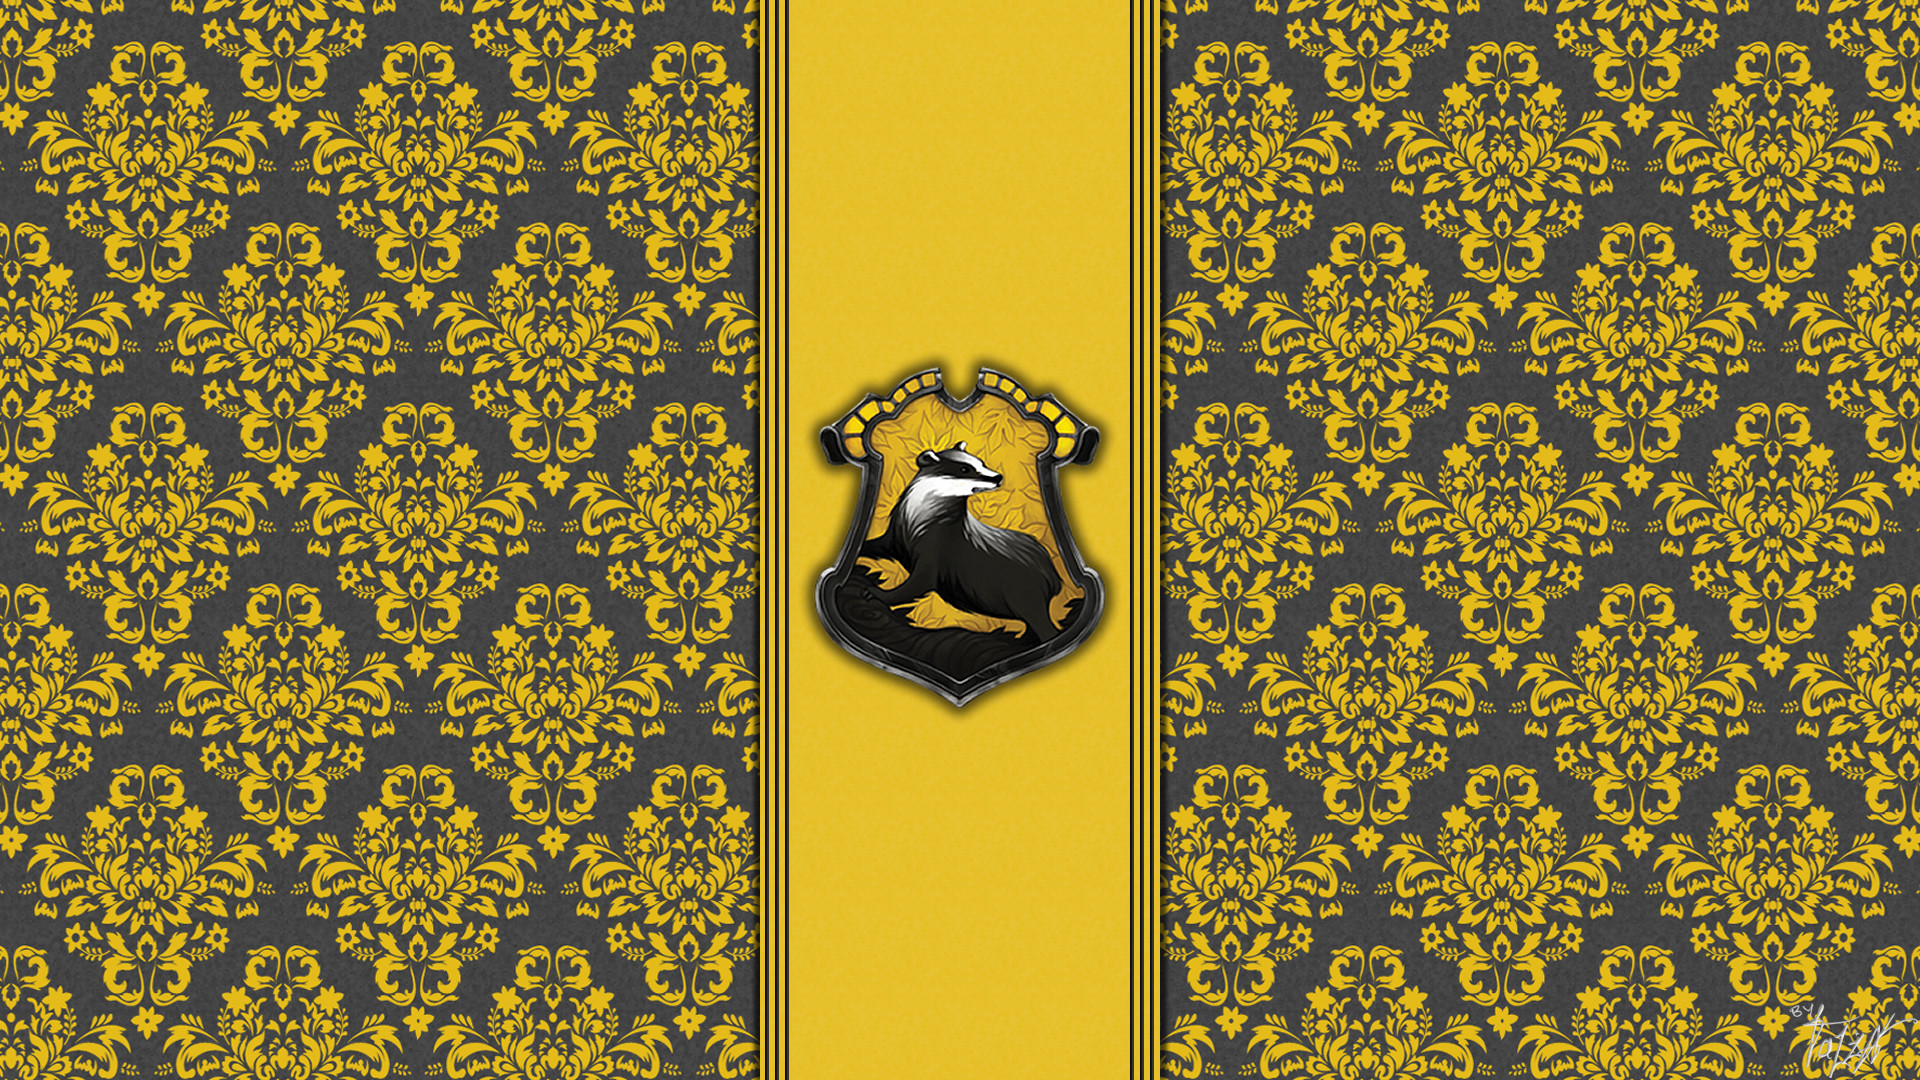 Cute Harry Potter Hufflepuff Computer Wallpapers Wallpapers